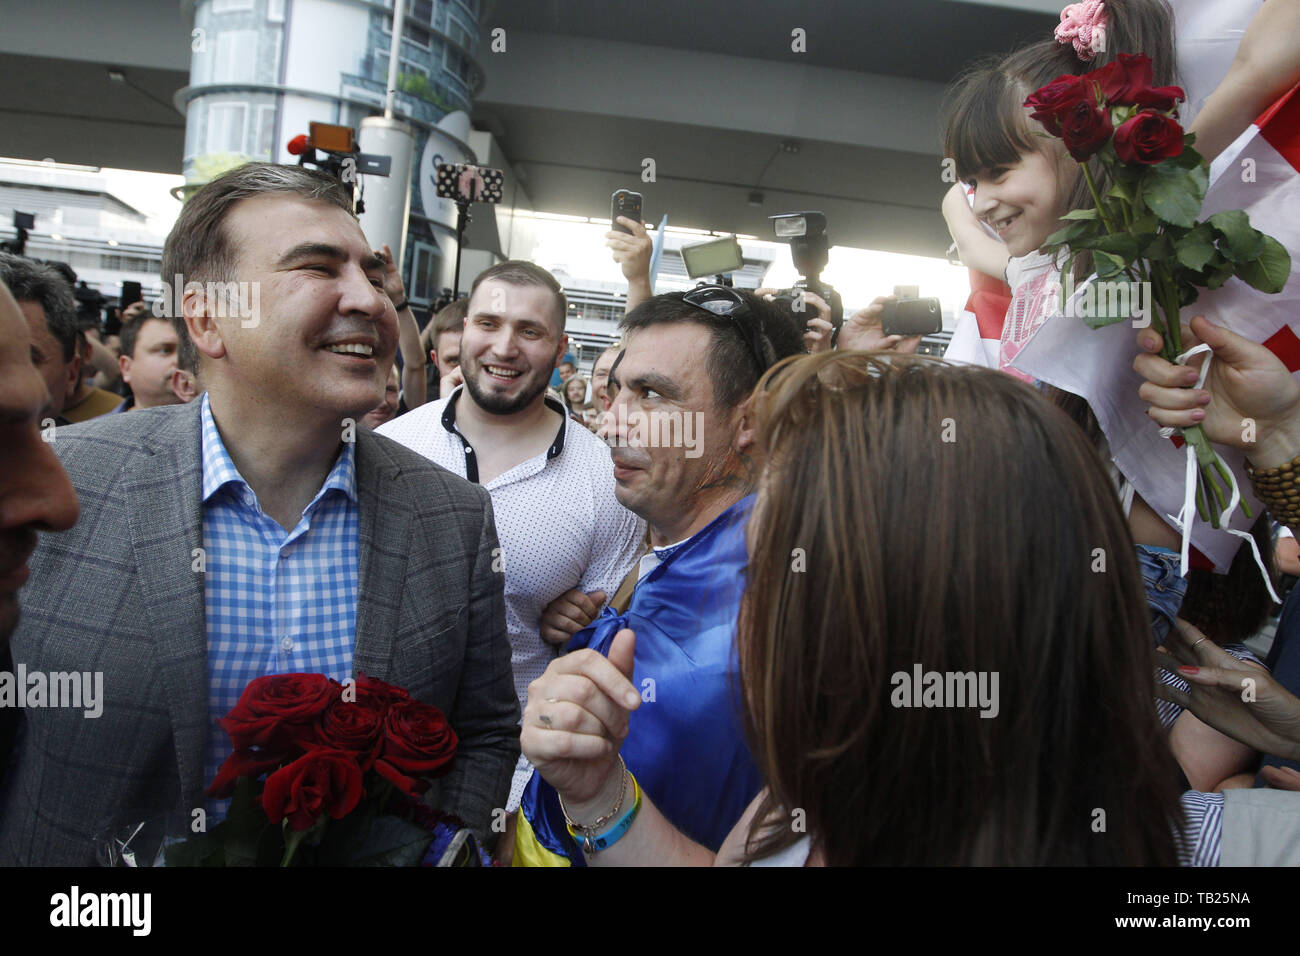 May 29, 2019 - Kiev, Ukraine - Former Georgian president and ex-Odessa Governor MIKHEIL SAAKASHVILI (L) speaks with supporters as he arrives to the Boryspil international airport near Kiev, Ukraine, on 29 May 2019. Saakashvili returned to Ukraine after Ukrainian President Volodymyr Zelensky has reinstated Mikheil Saakashvili's Ukrainian citizenship on 28 May 2019. Zelensky deleted the respective provision from his predecessor Petro Poroshenko's No. 196 order dated July 26, 2017, the UNIAN inform agency reported. Ukrainian opposition leader Mikheil Saakashvili was deported to Poland on 12 Febru Stock Photo